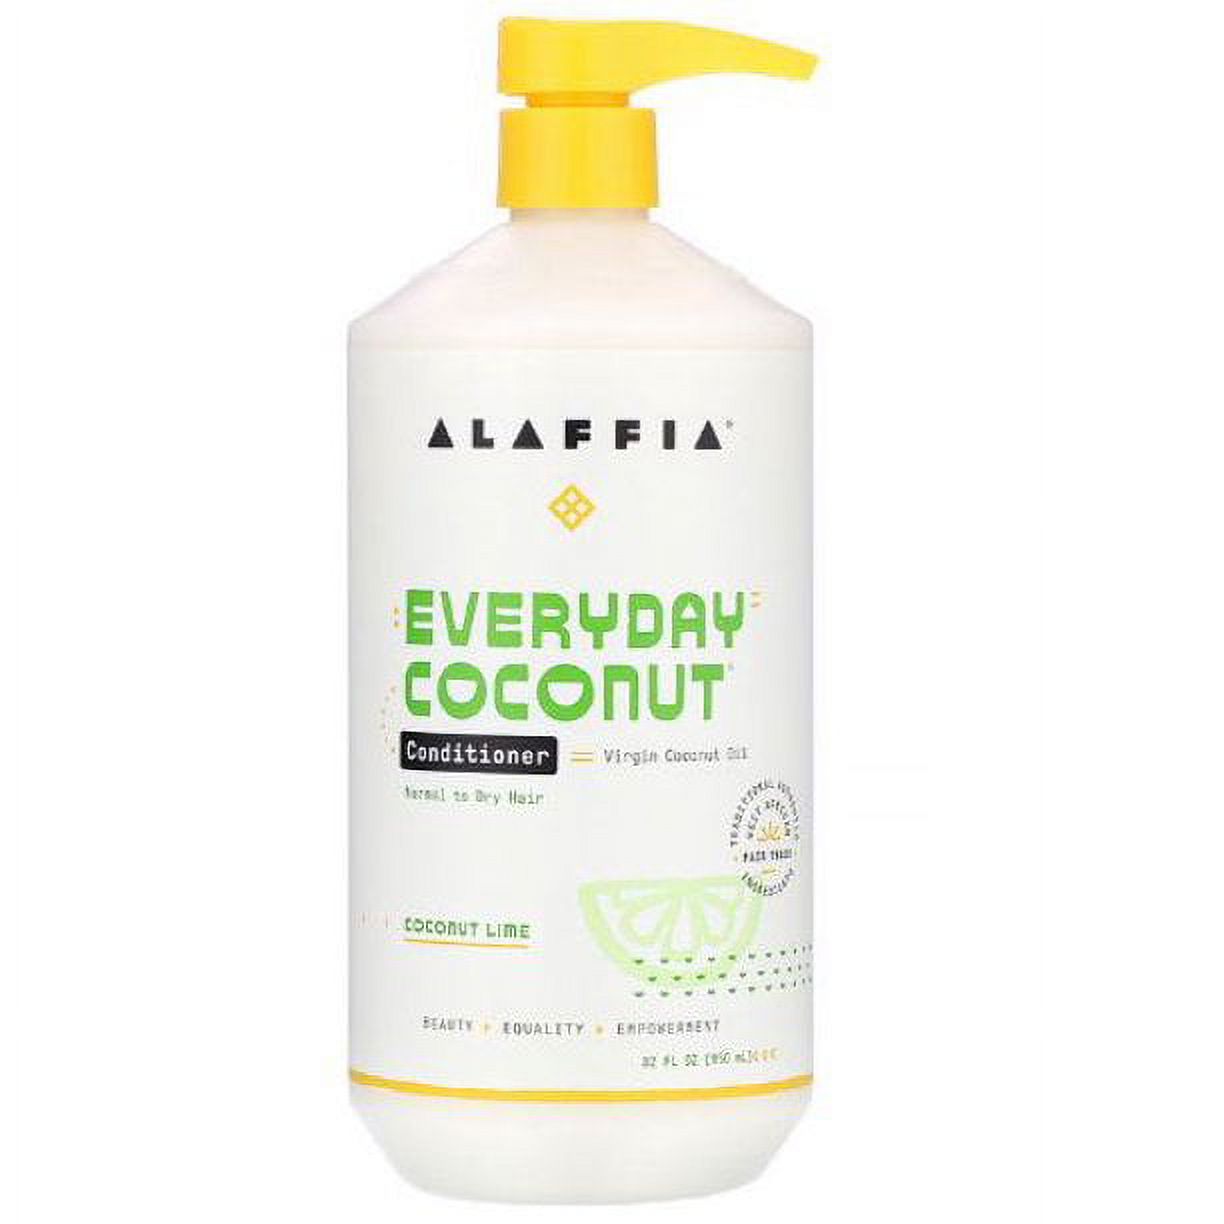 Alaffia, Everyday Coconut, Conditioner, Normal to Dry Hair, Coconut Lime, 32 fl oz (pack of 3) - image 1 of 5